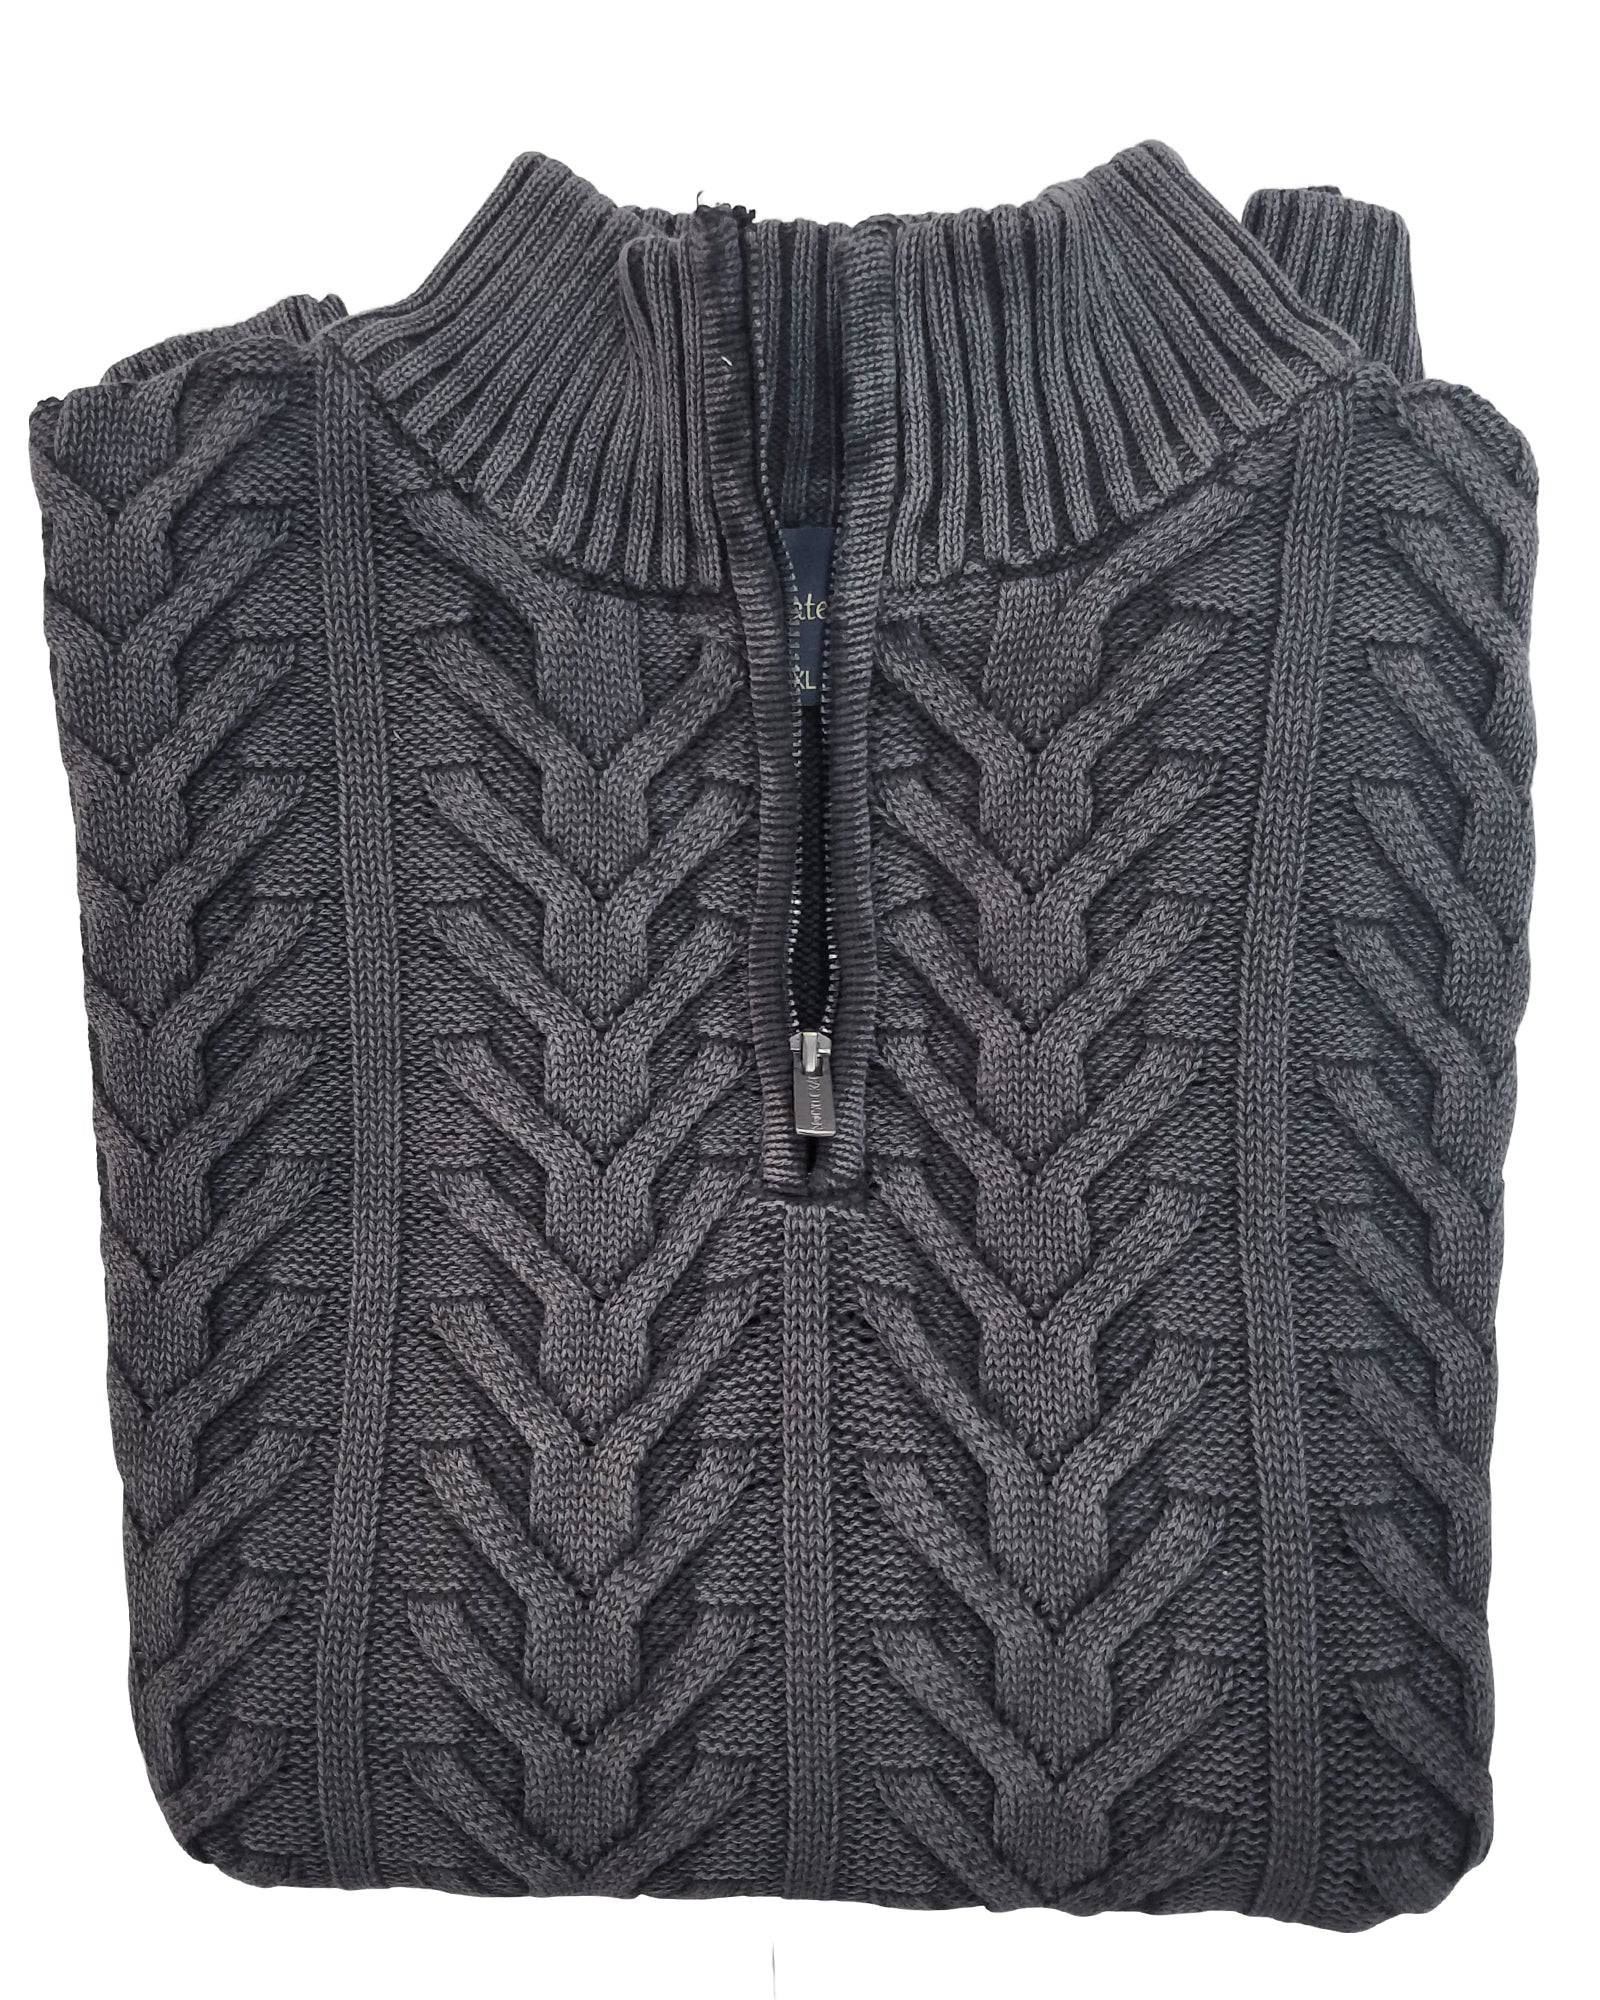 1/4 Zip Mock Sweater in Grey Washed Cotton Cable Knit - Rainwater's Men's Clothing and Tuxedo Rental